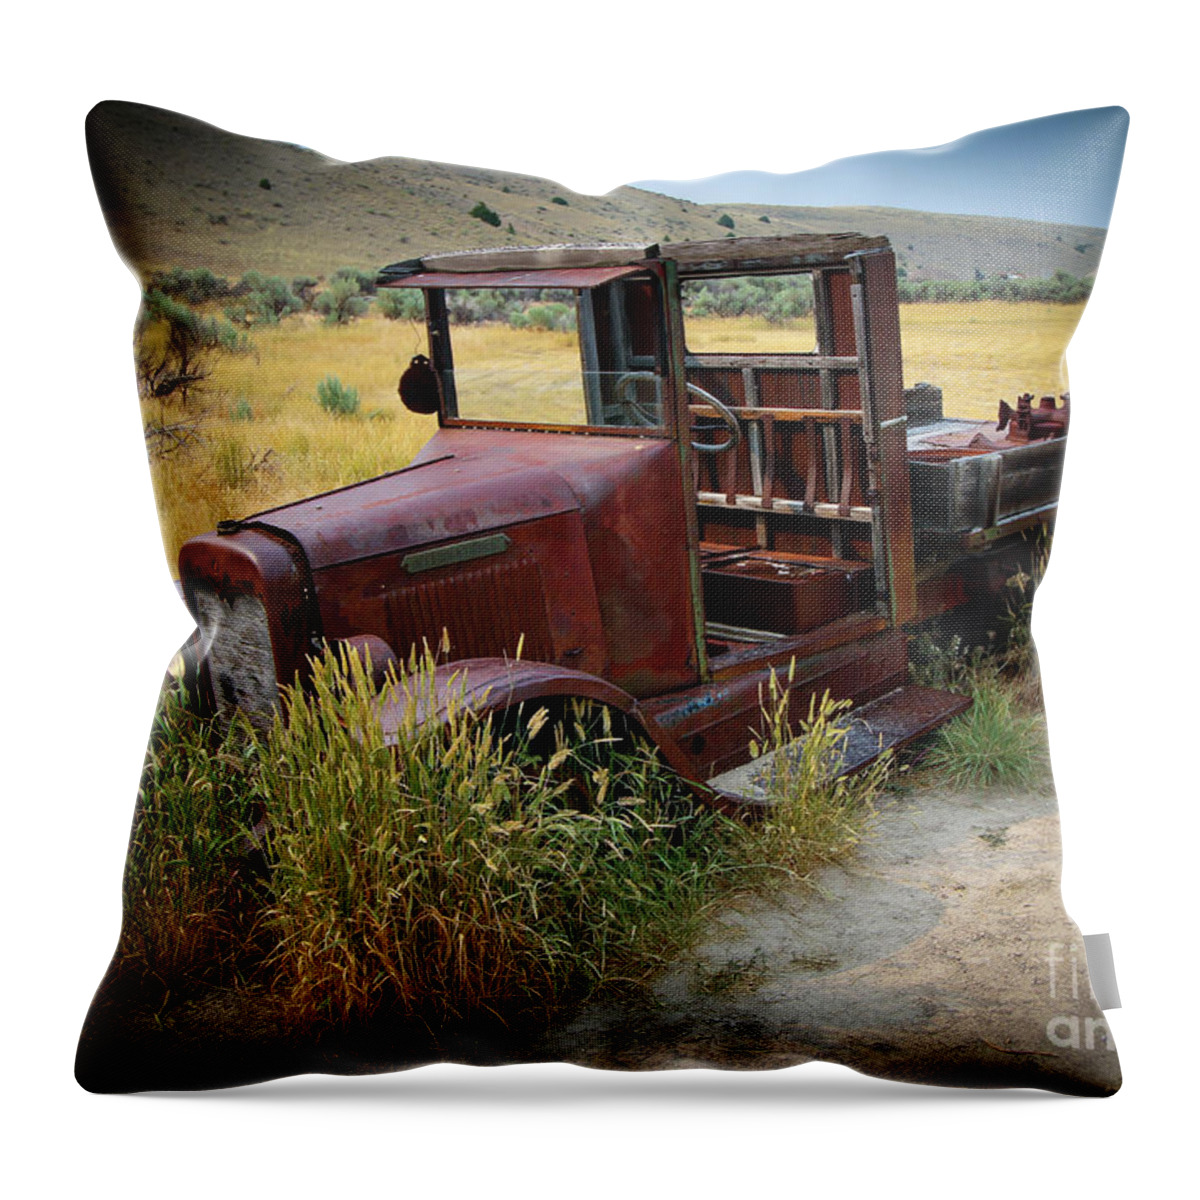 Bannack Throw Pillow featuring the photograph Bannack Montana Old Truck by Veronica Batterson